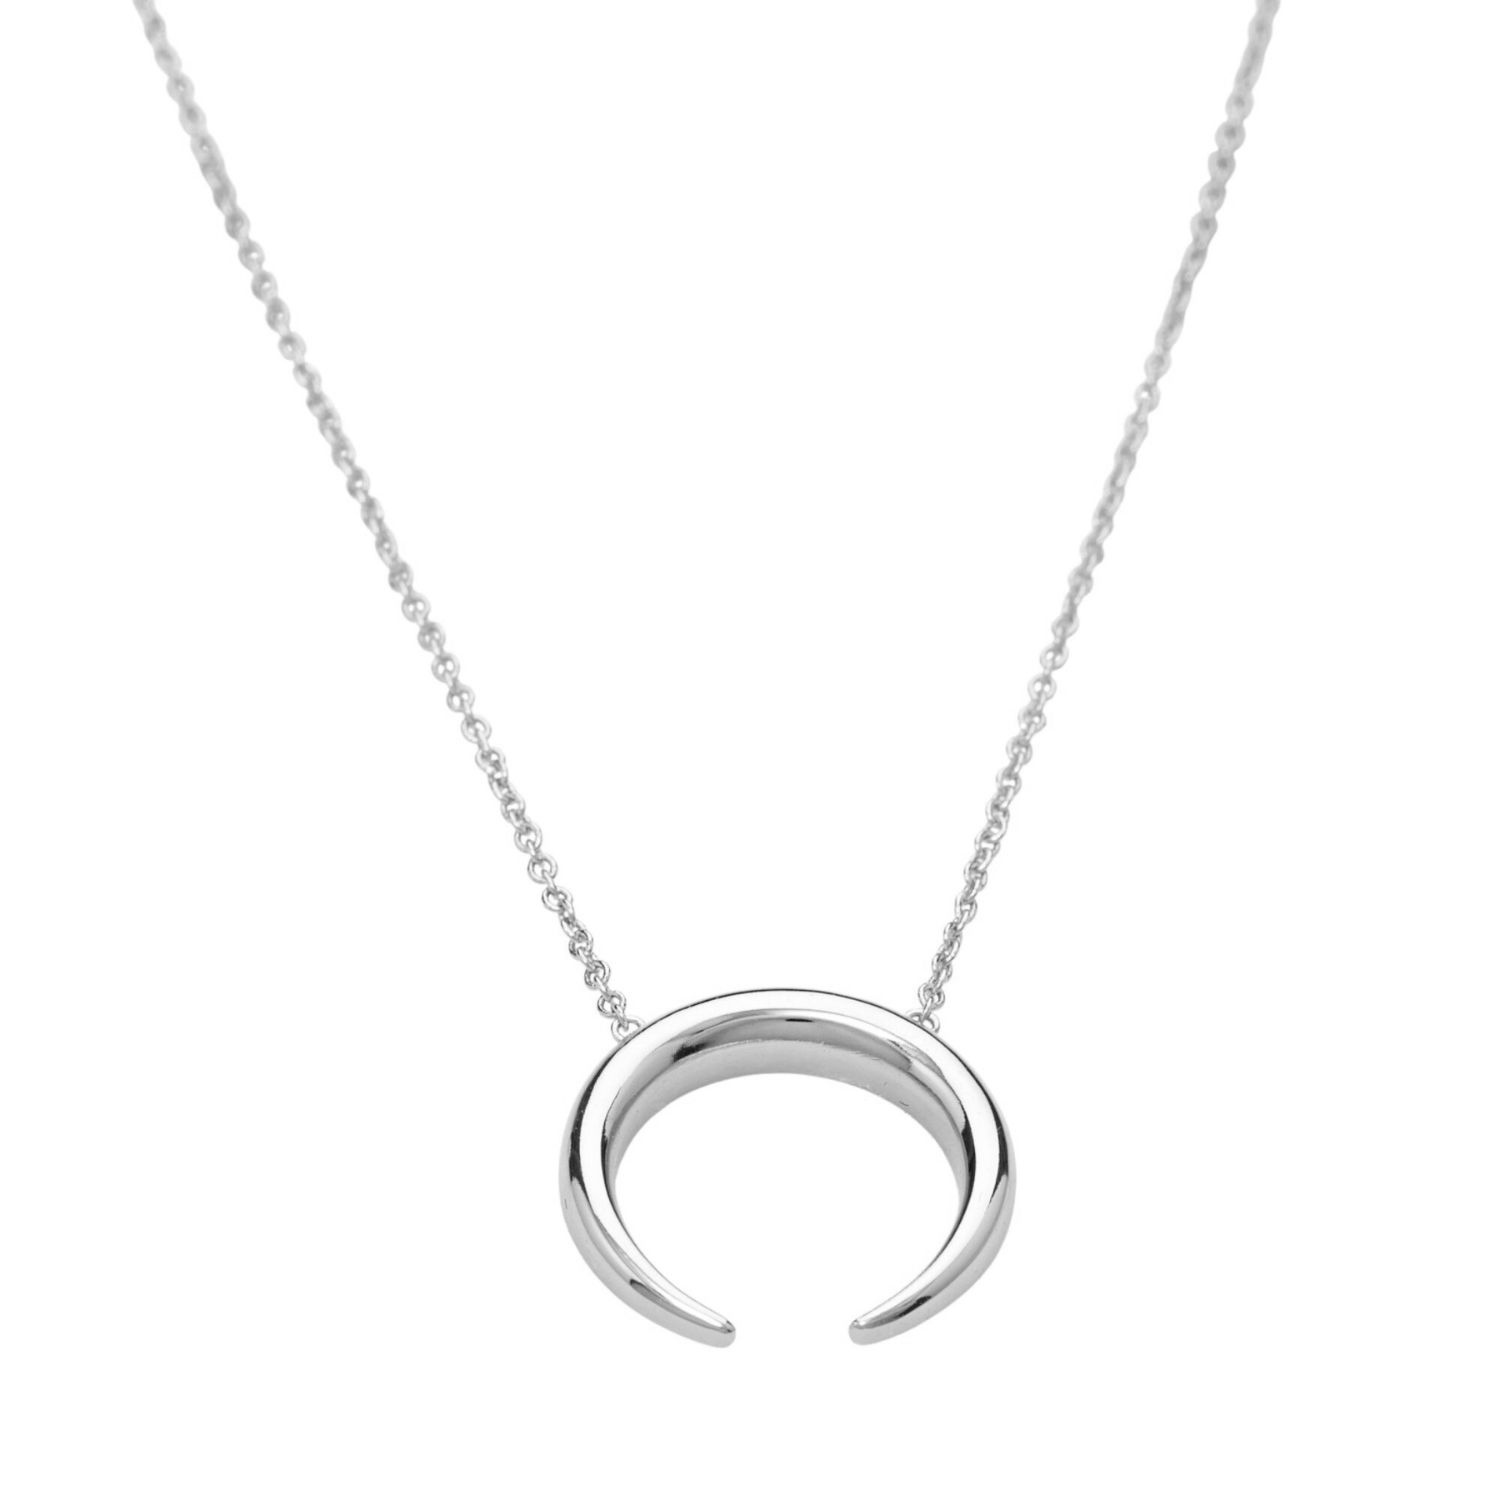 Women’s Silver Horn Necklace With Slider Clasp Scream Pretty